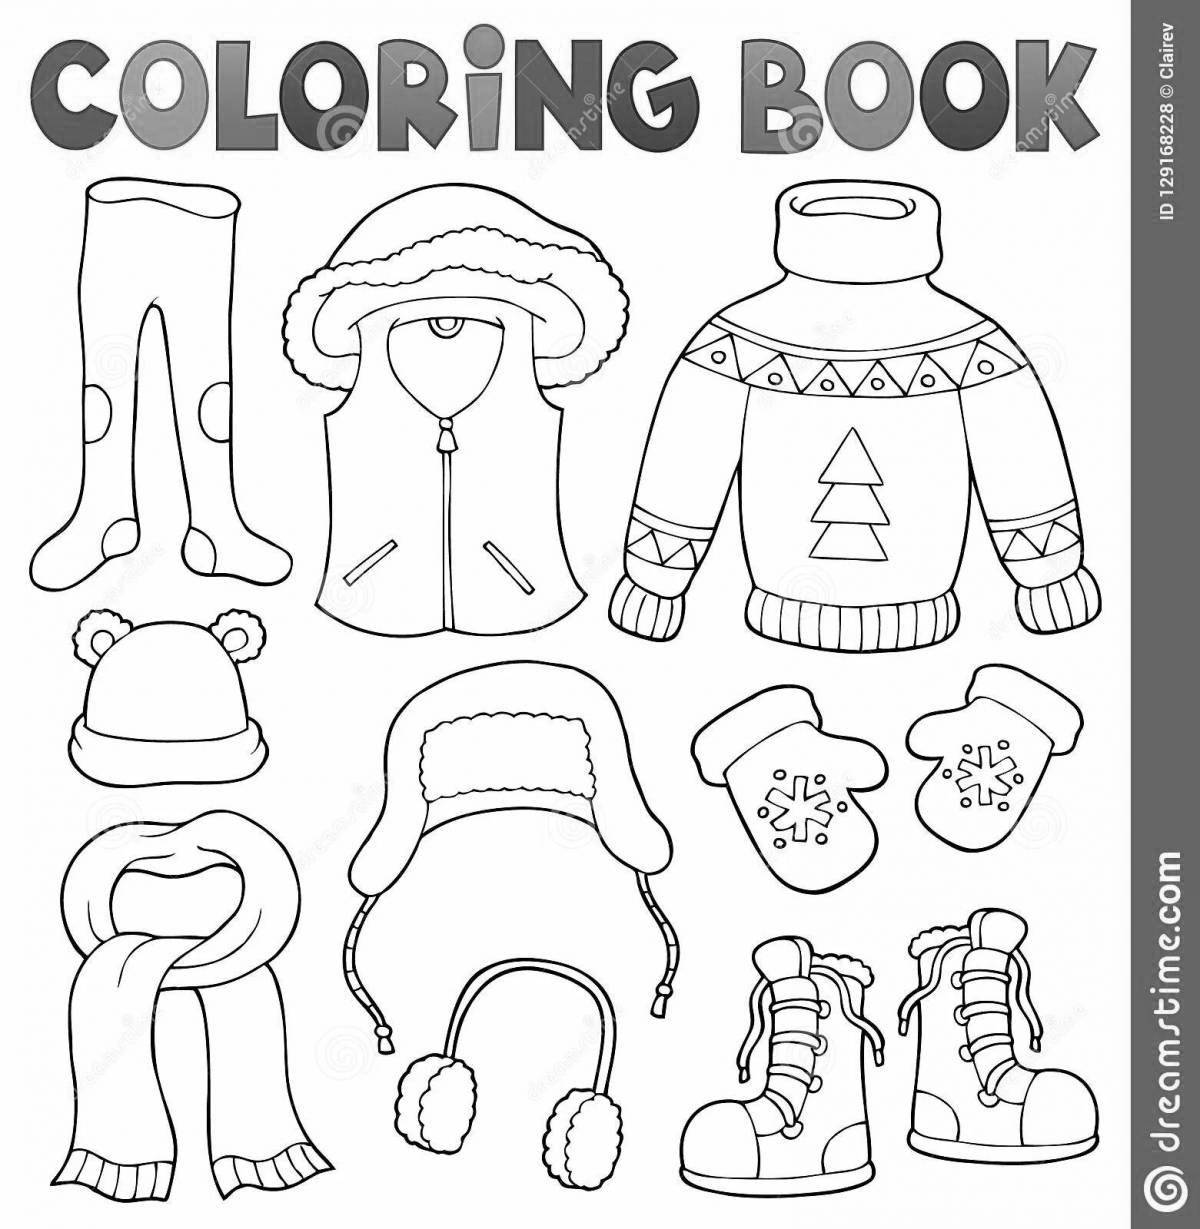 Coloring book bold winter clothes